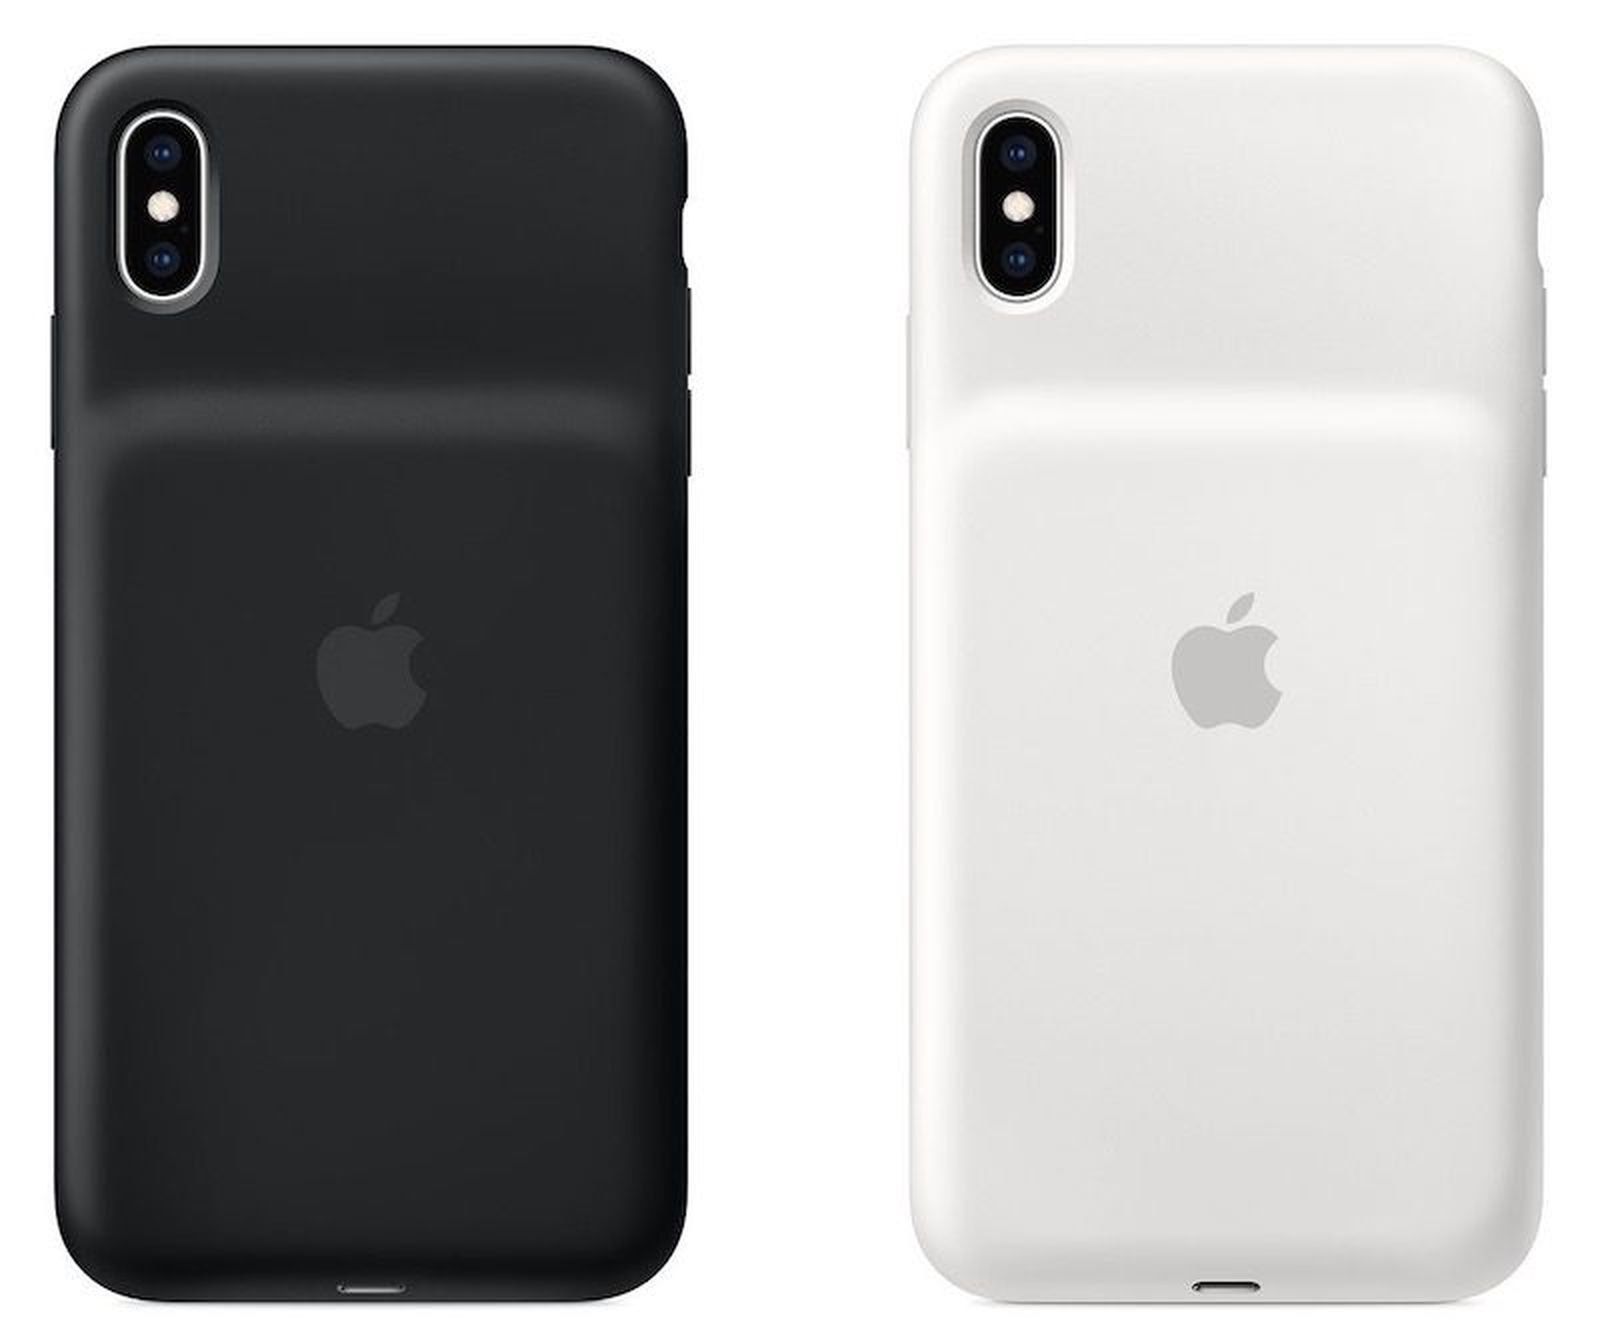 Apple Releases Smart Battery Cases for iPhone XS, XS Max and XR 